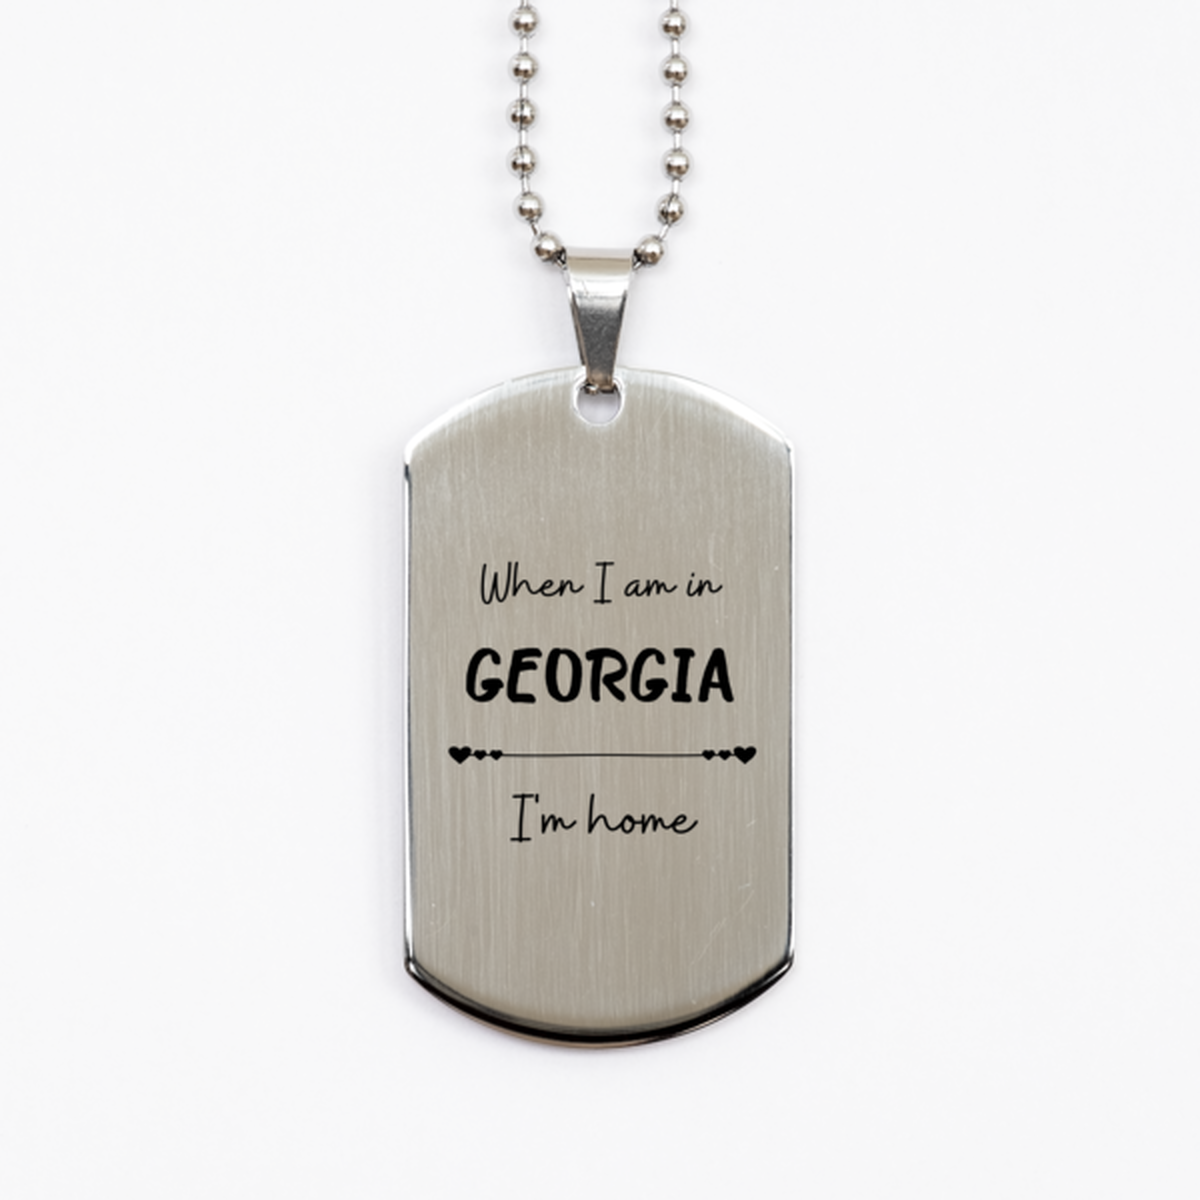 When I am in Georgia I'm home Silver Dog Tag, Cheap Gifts For Georgia, State Georgia Birthday Gifts for Friends Coworker